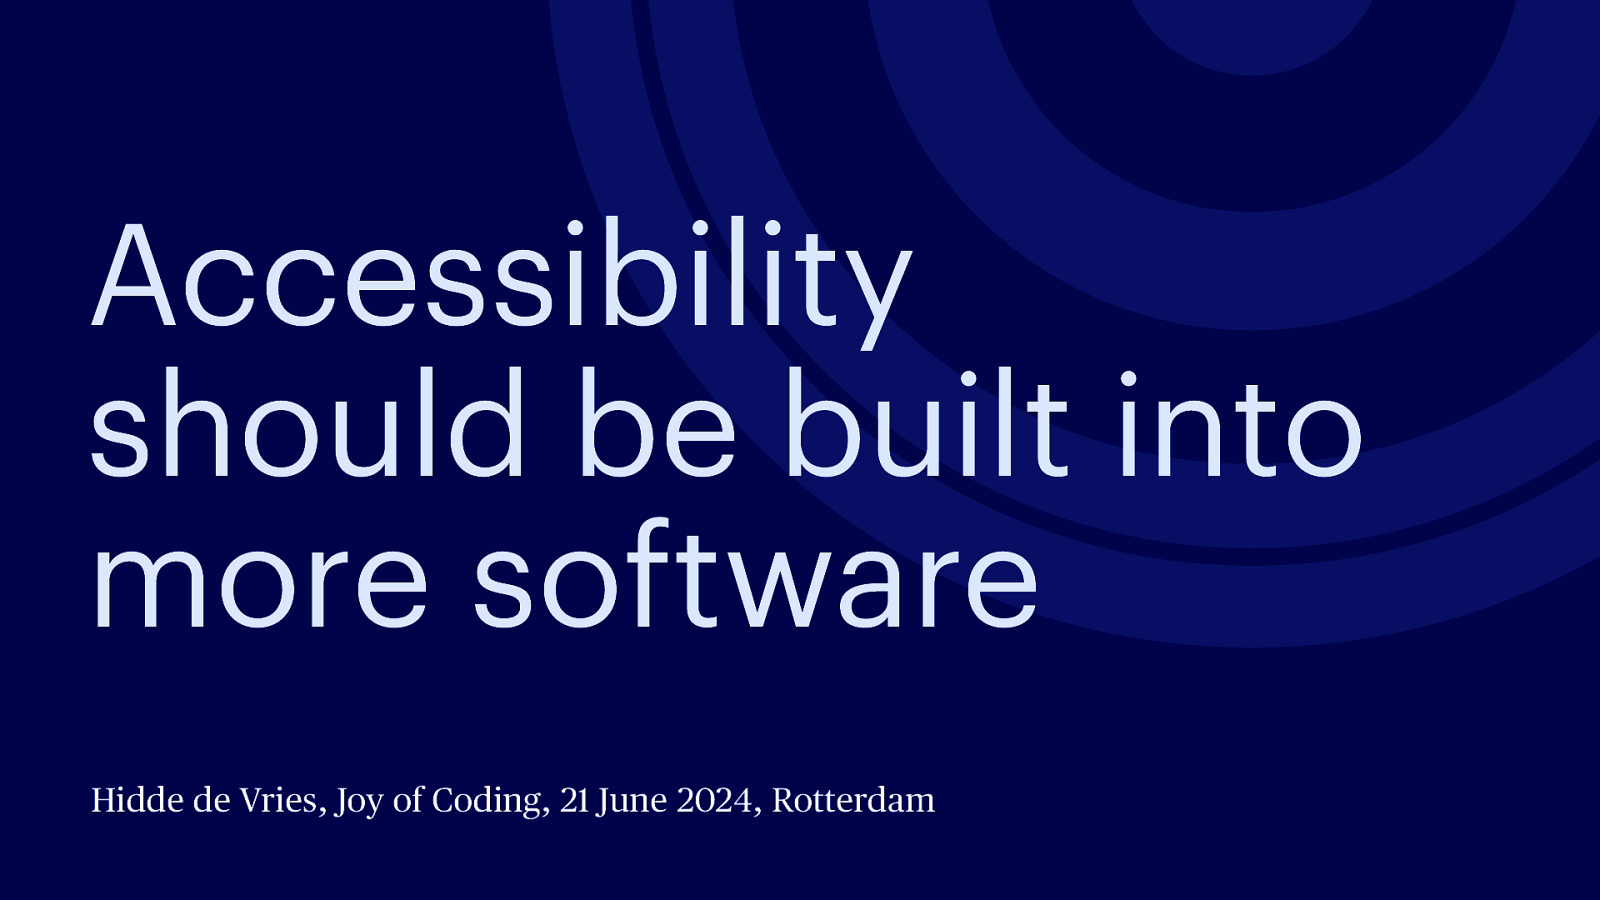 More software should have accessibility built in by Hidde de Vries